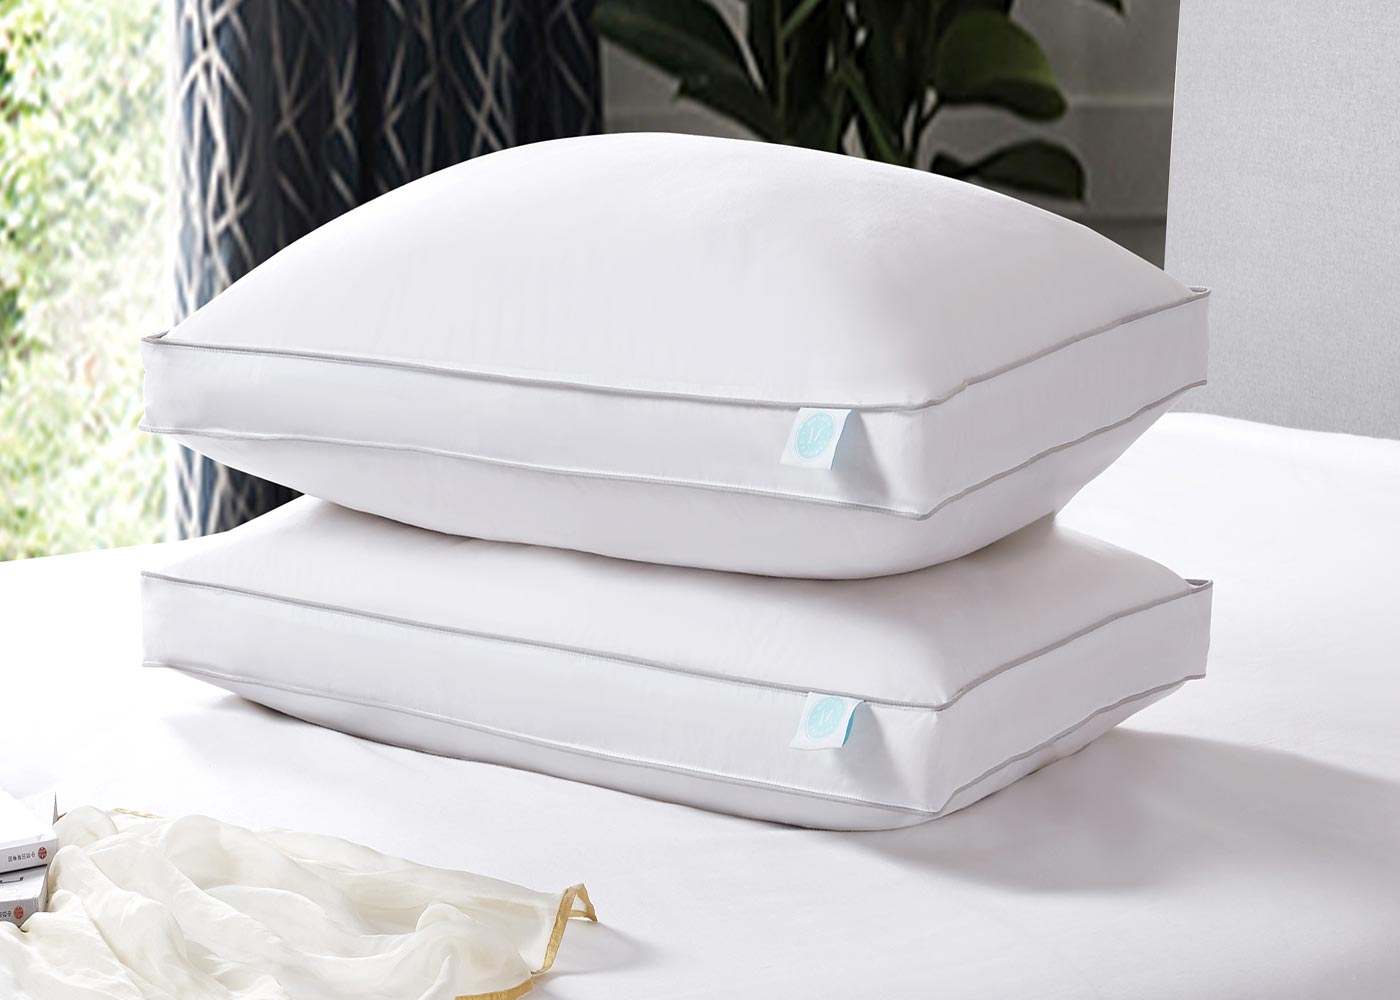 https://cdn.shopify.com/s/files/1/2420/9425/products/white-feather-and-down-pillow-2-pack-by-martha-stewart-670675.jpg?v=1636643242